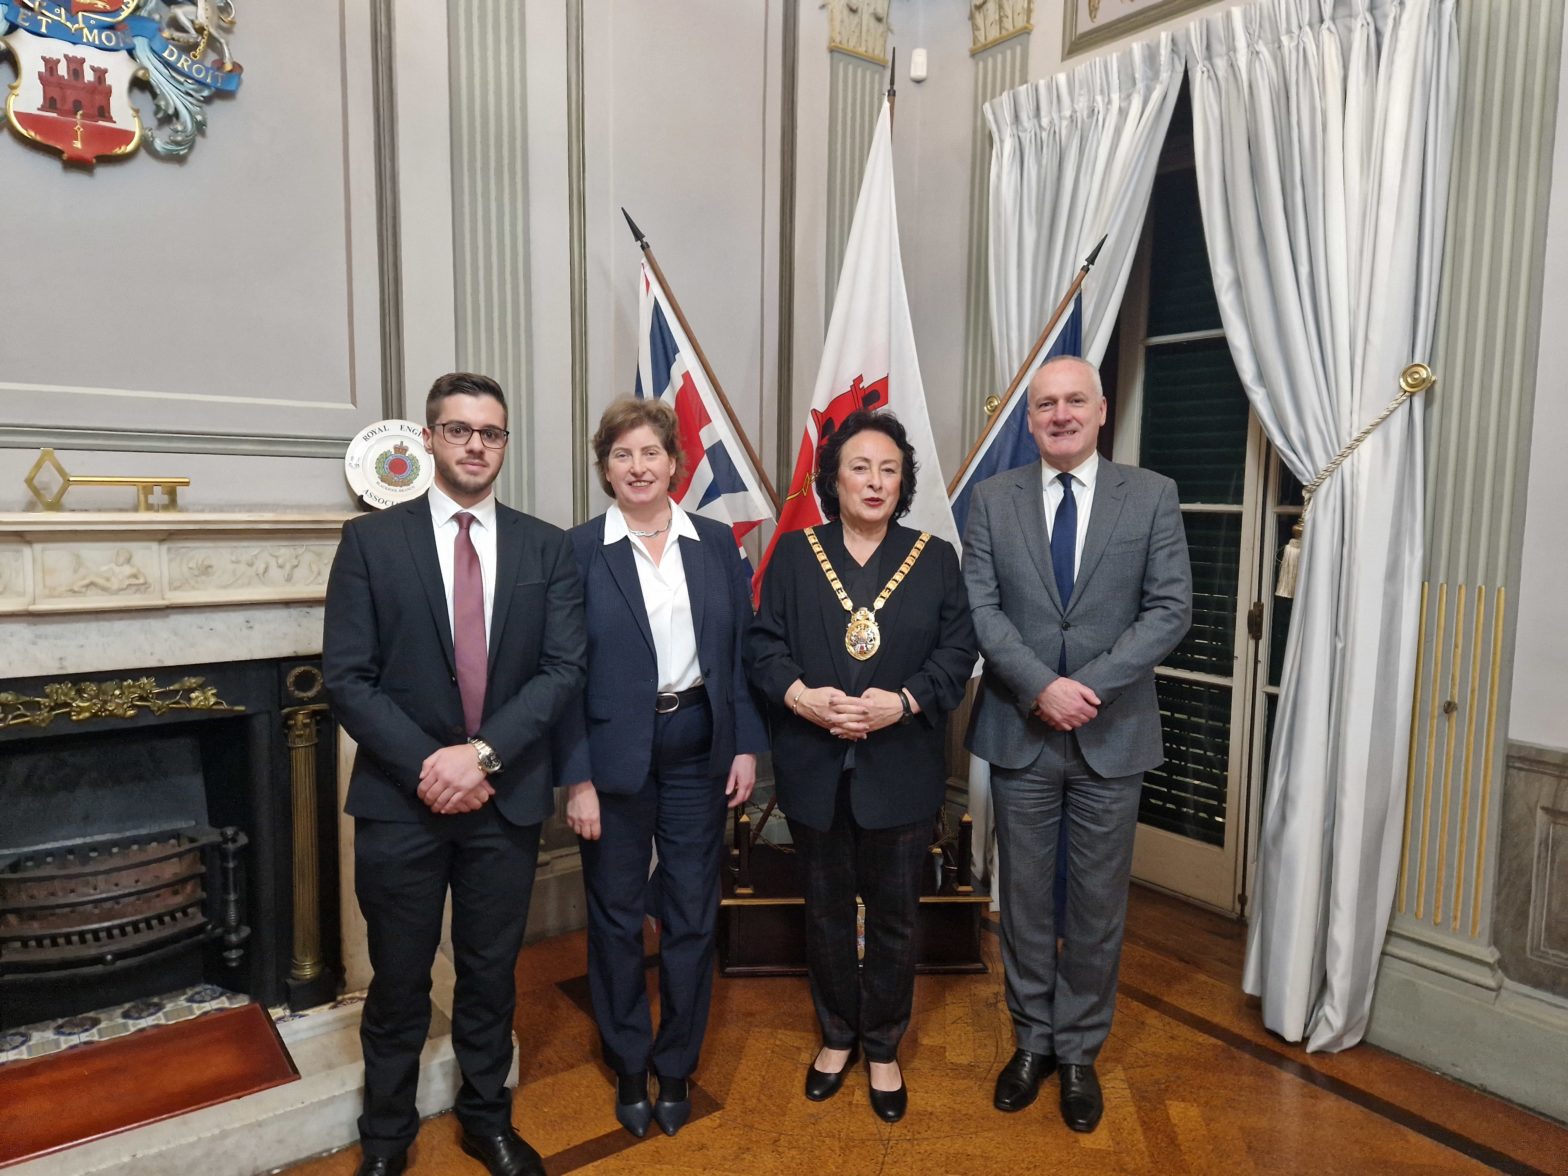 CWEIC CEO Rosie Glazebrook Champions Gibraltar Commonwealth Business Ties